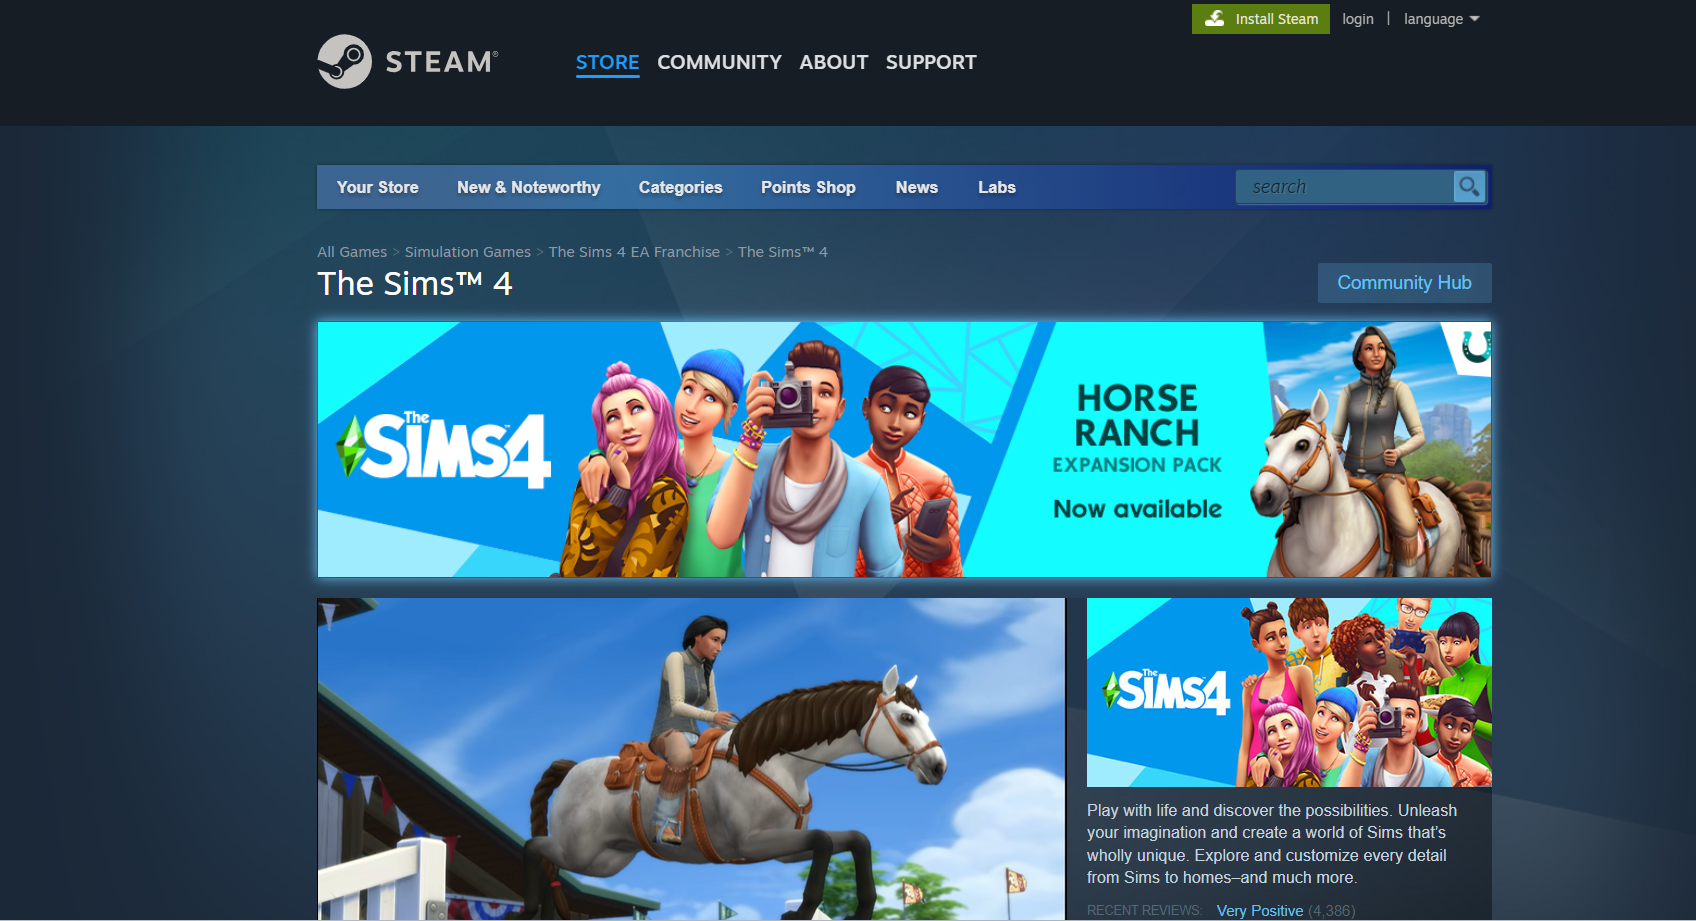 The Sims 4 in steam